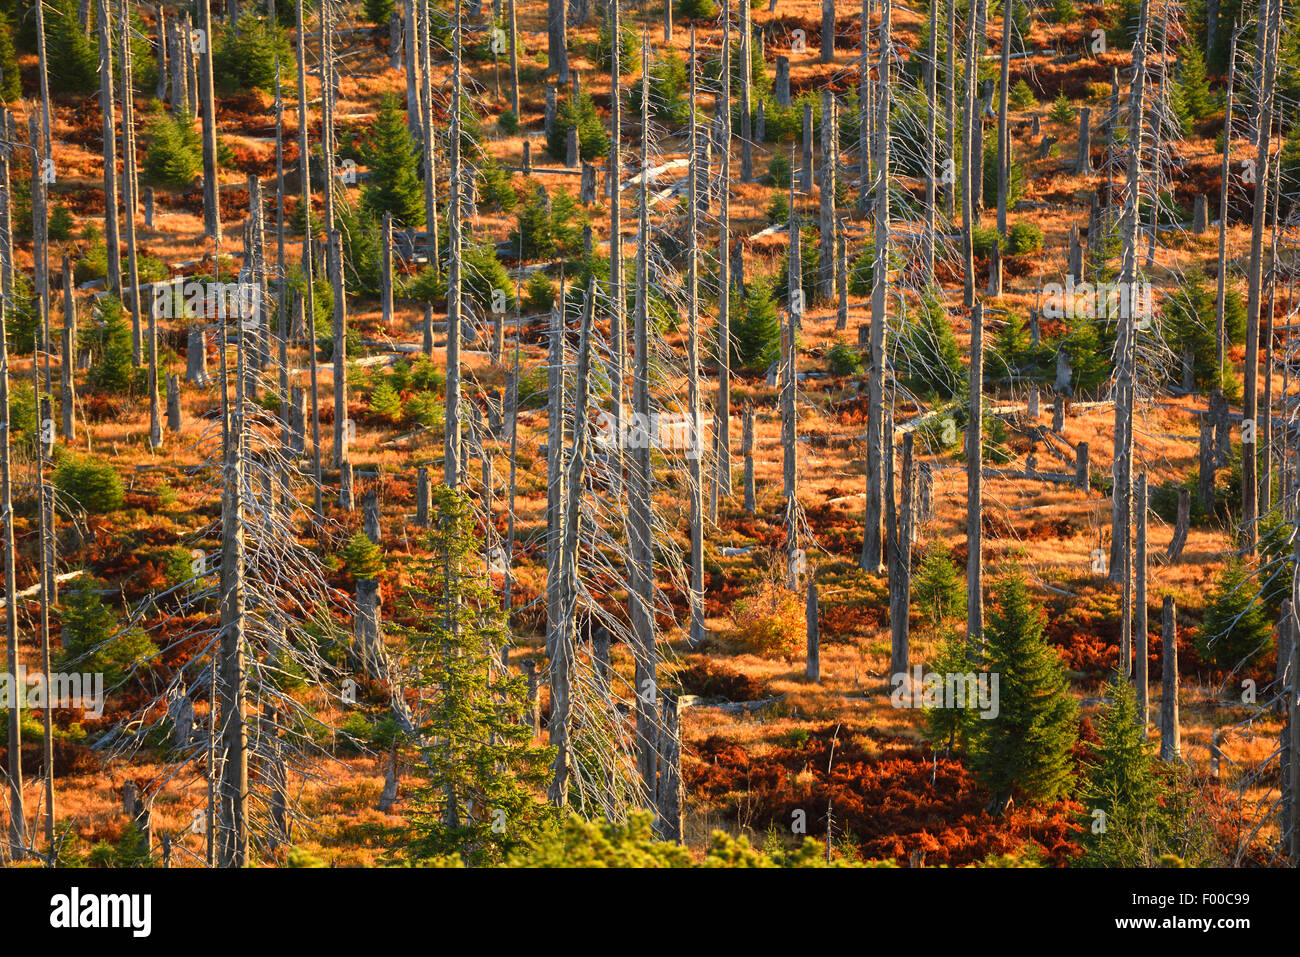 Norway spruce (Picea abies), landscape of a dead Norway spruce forest killed by bark beetle (Scolytidae), Germany, Bavaria, Bavarian Forest National Park Stock Photo